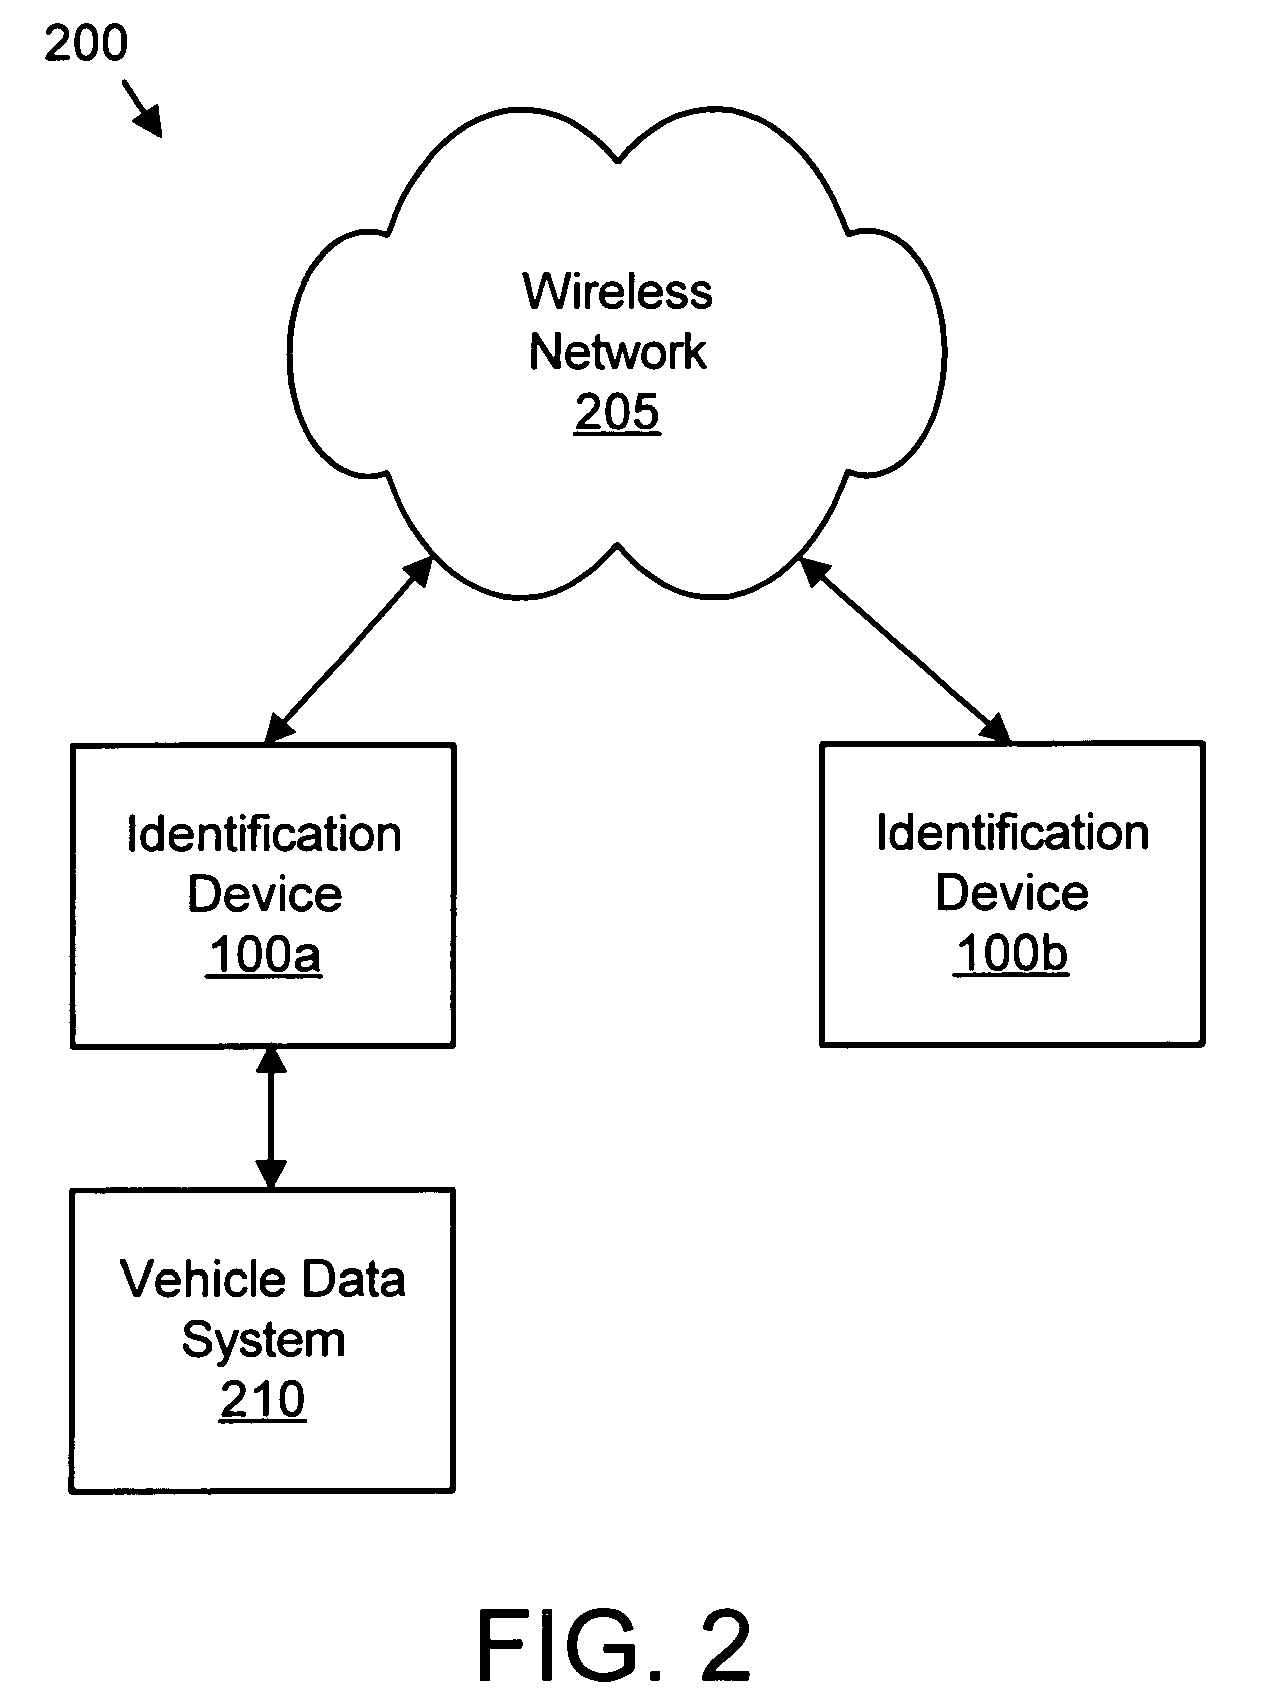 Apparatus, system, and method for exchanging vehicle identification data